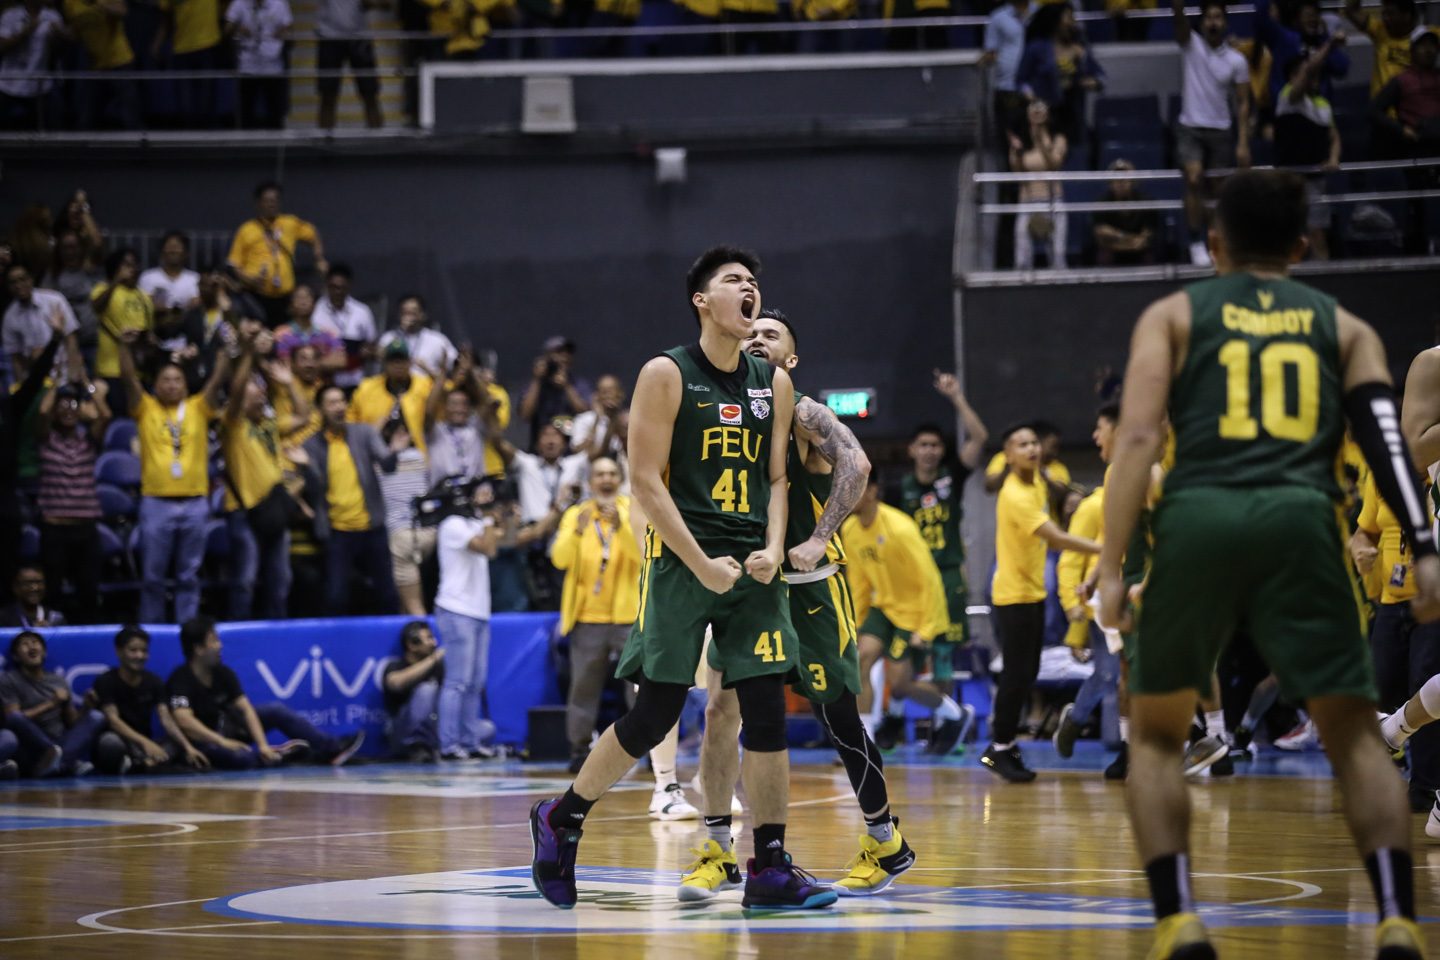 All’s forgiven with FEU star Arvin Tolentino